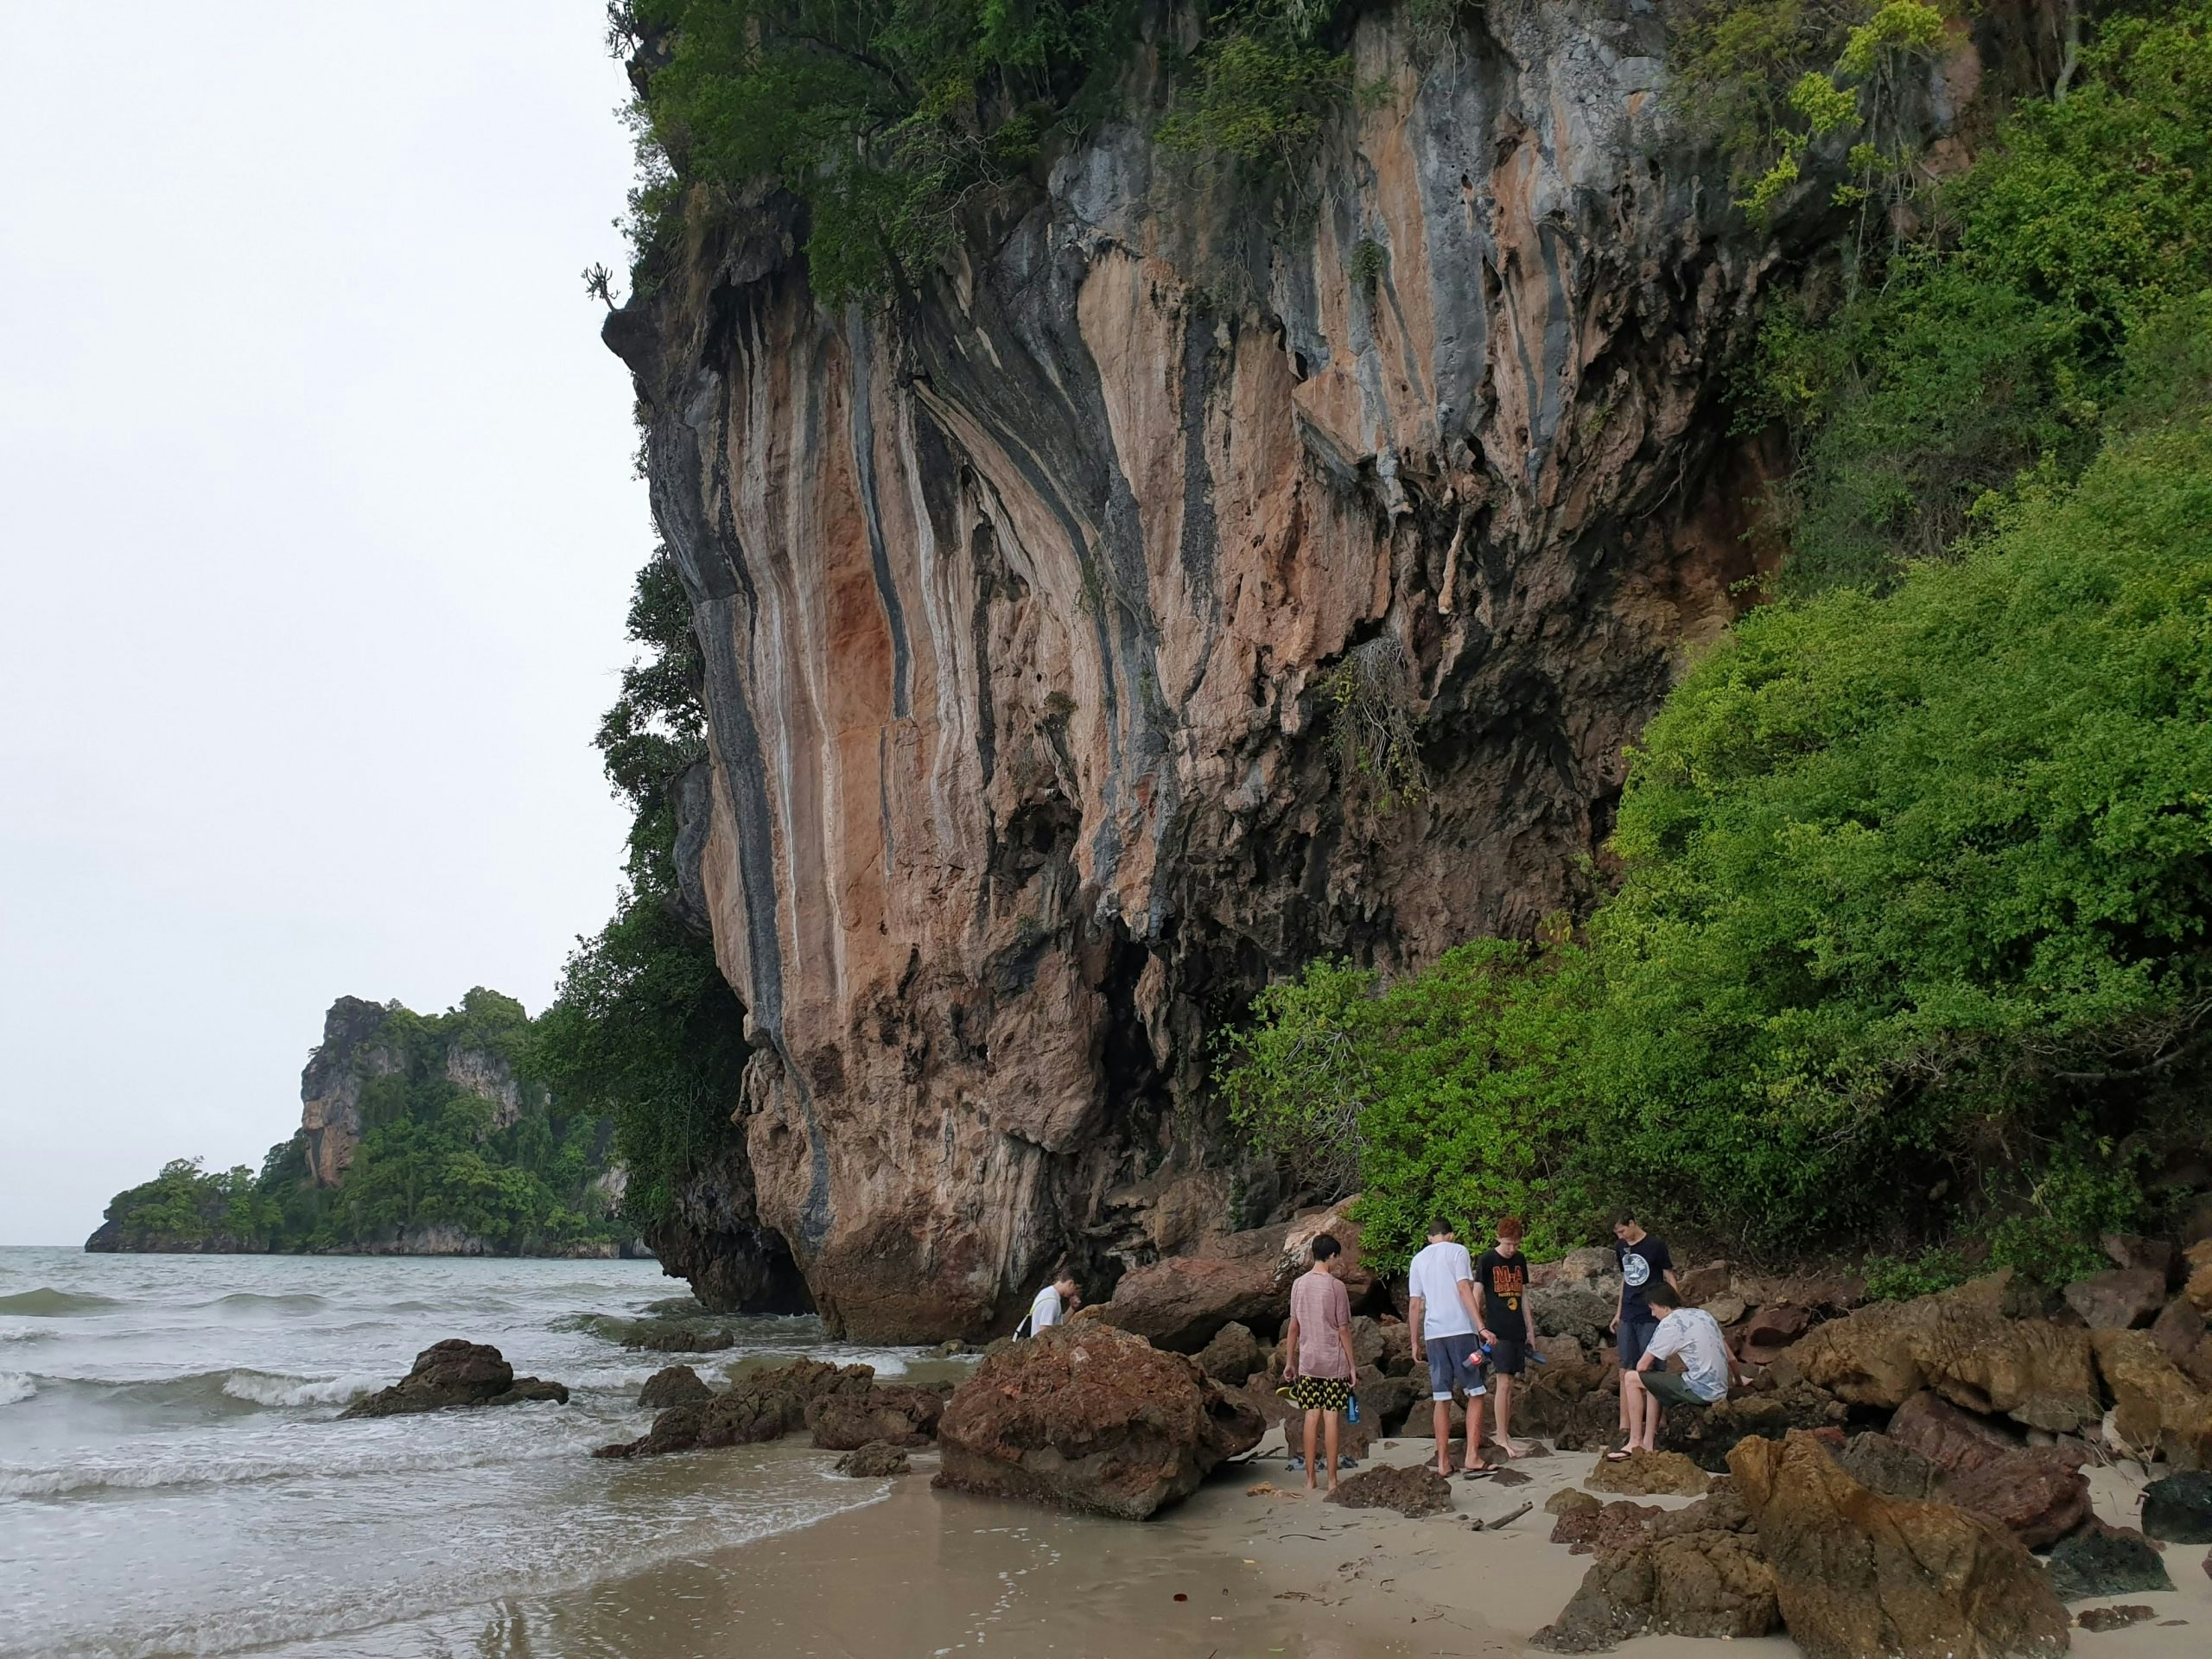 Exploring Railay, Thailand: A Hidden Oasis Accessible Only by Boat